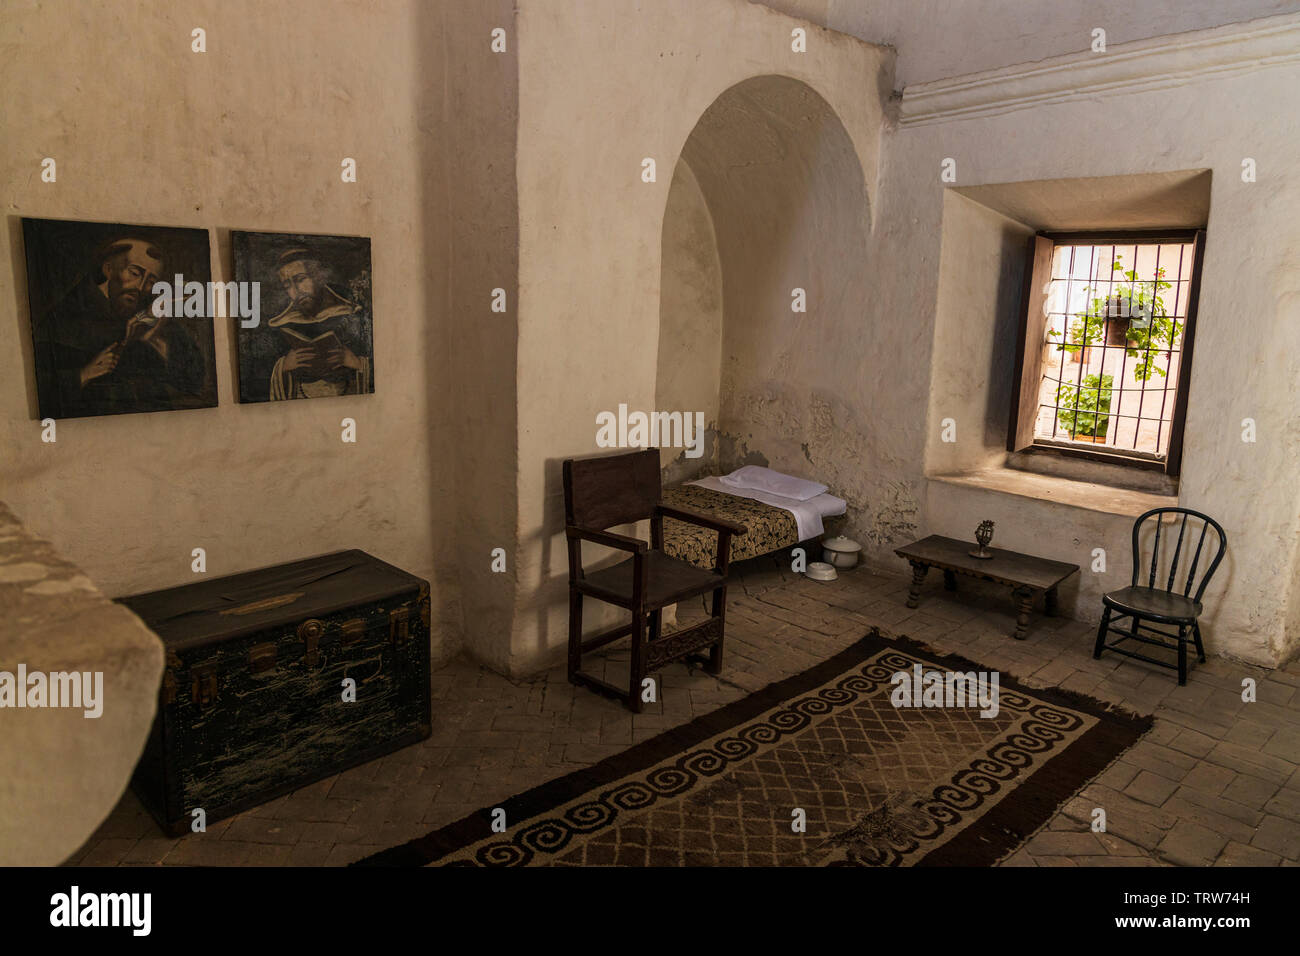 Bed and living space in the Monasterio de Santa Catalina, monastery, religious building in Arequipa, Peru, South America Stock Photo